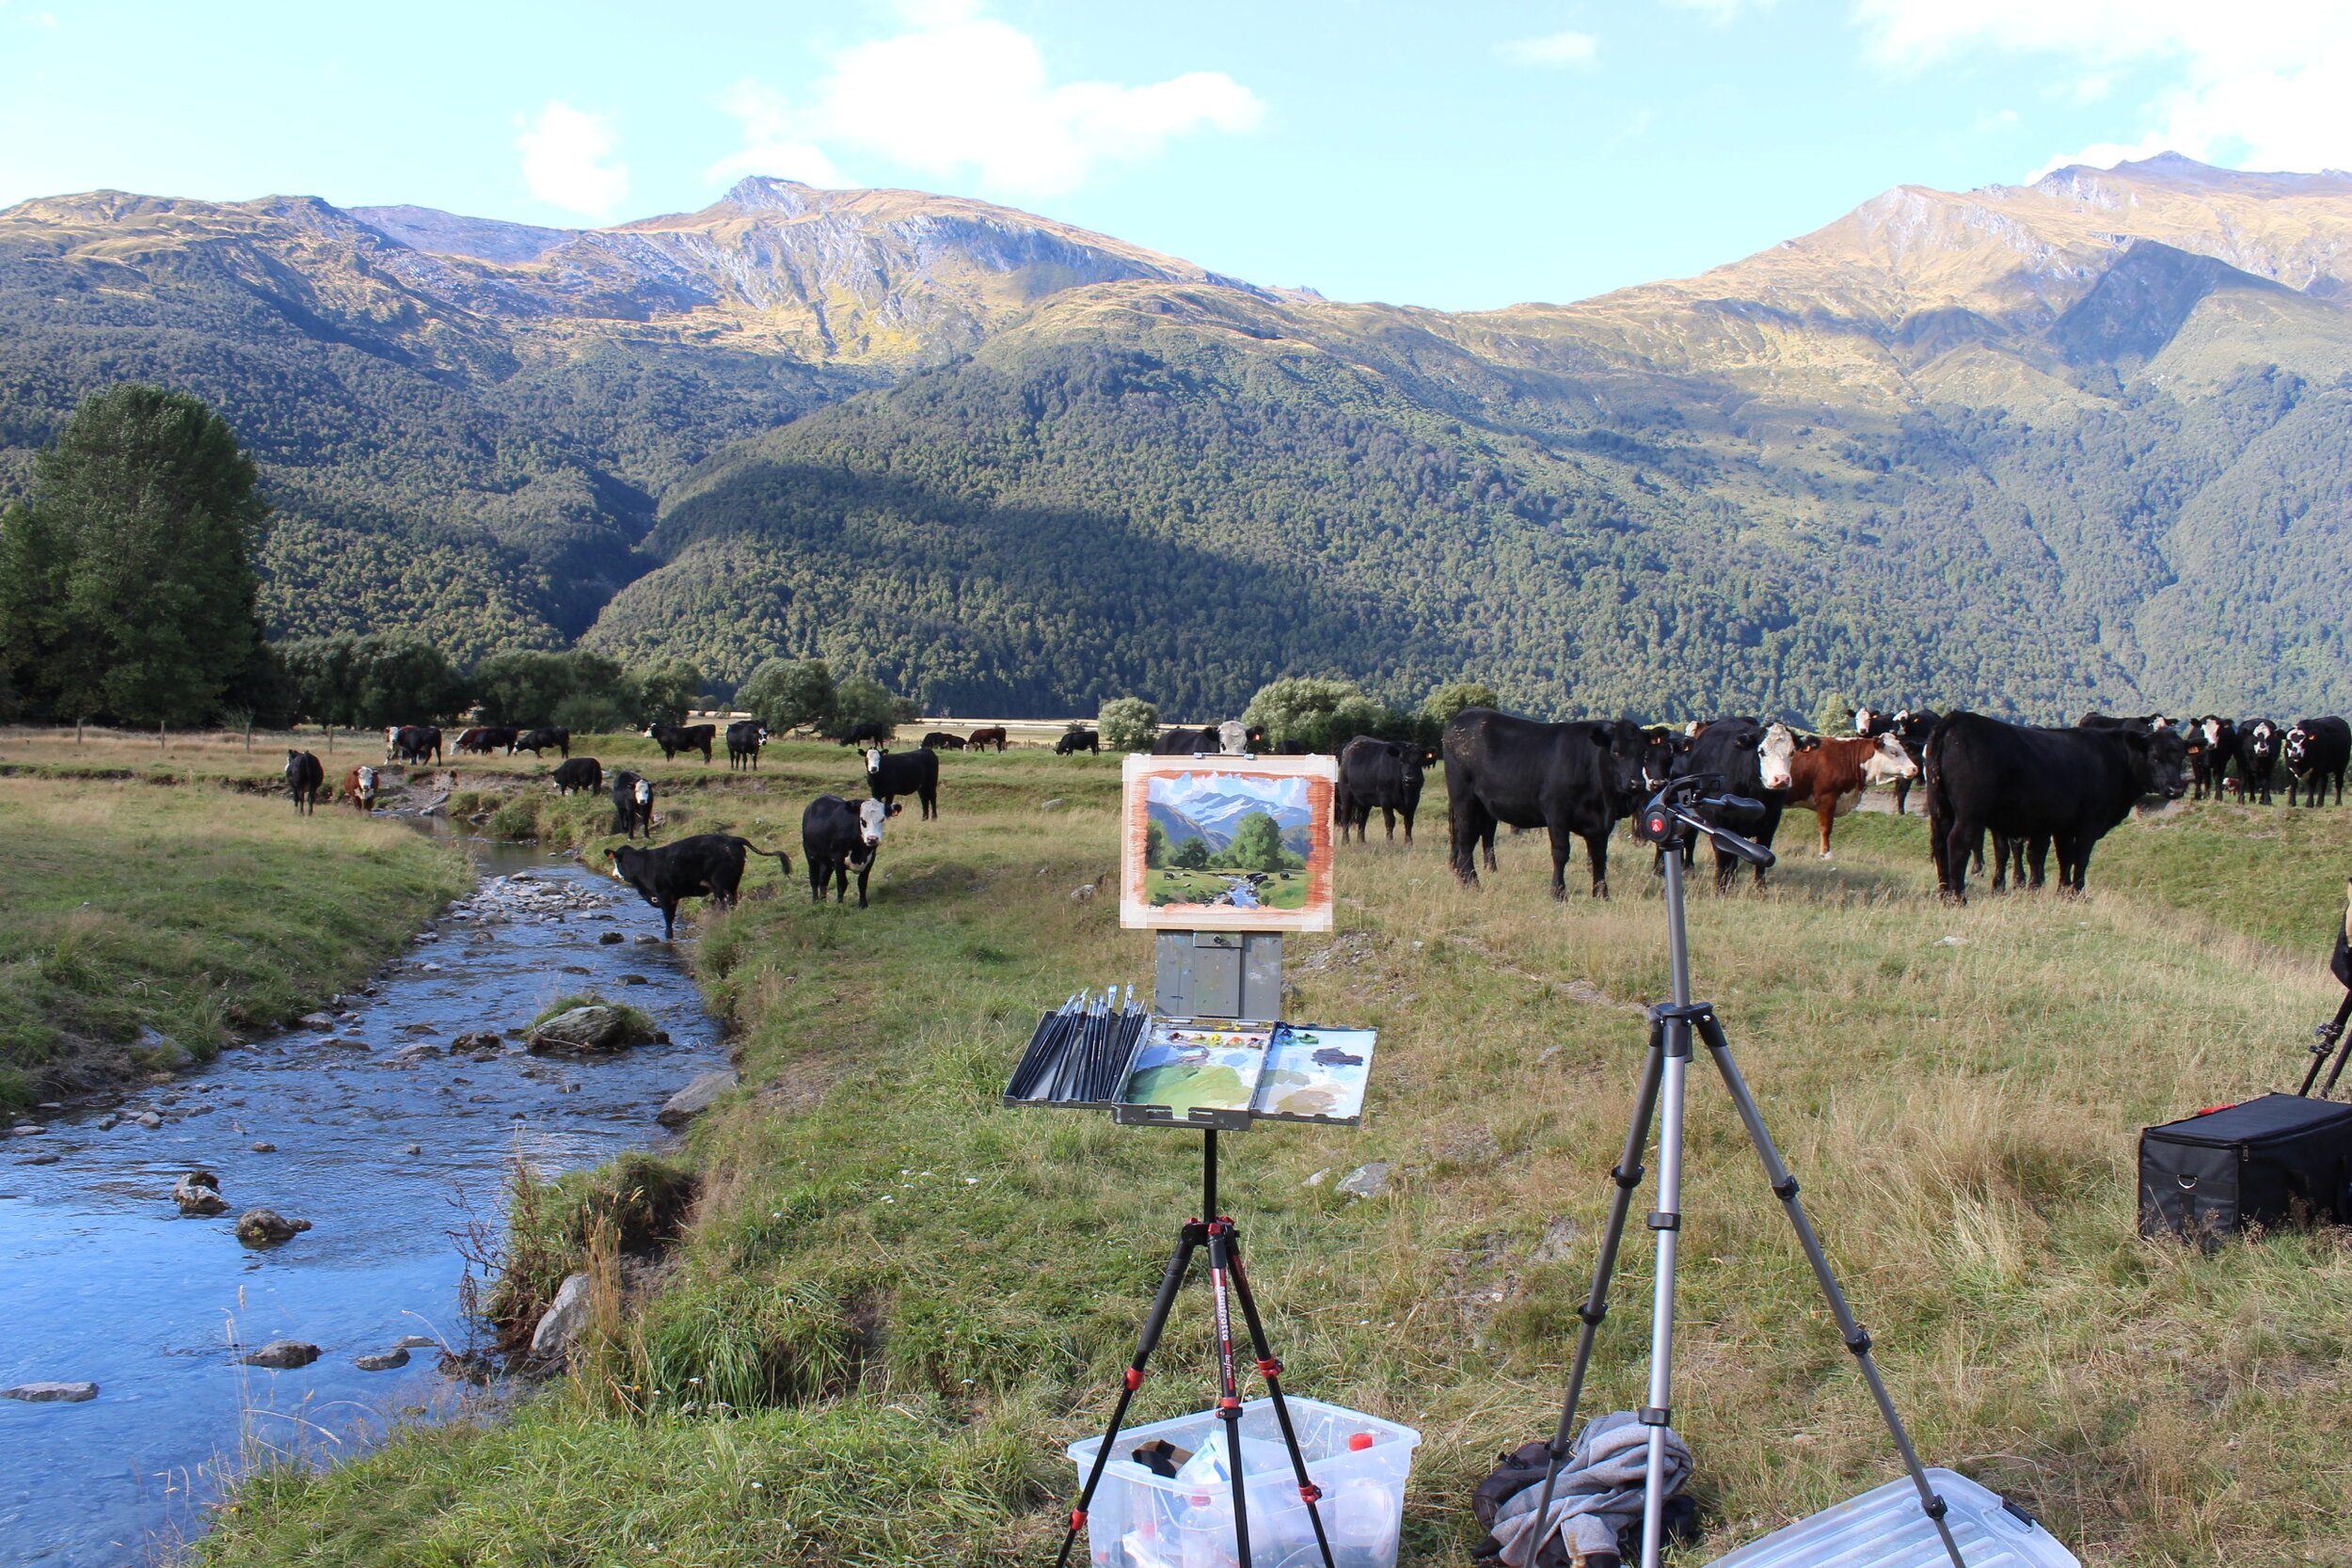 My finished plein air painting in the Matukituki Valley